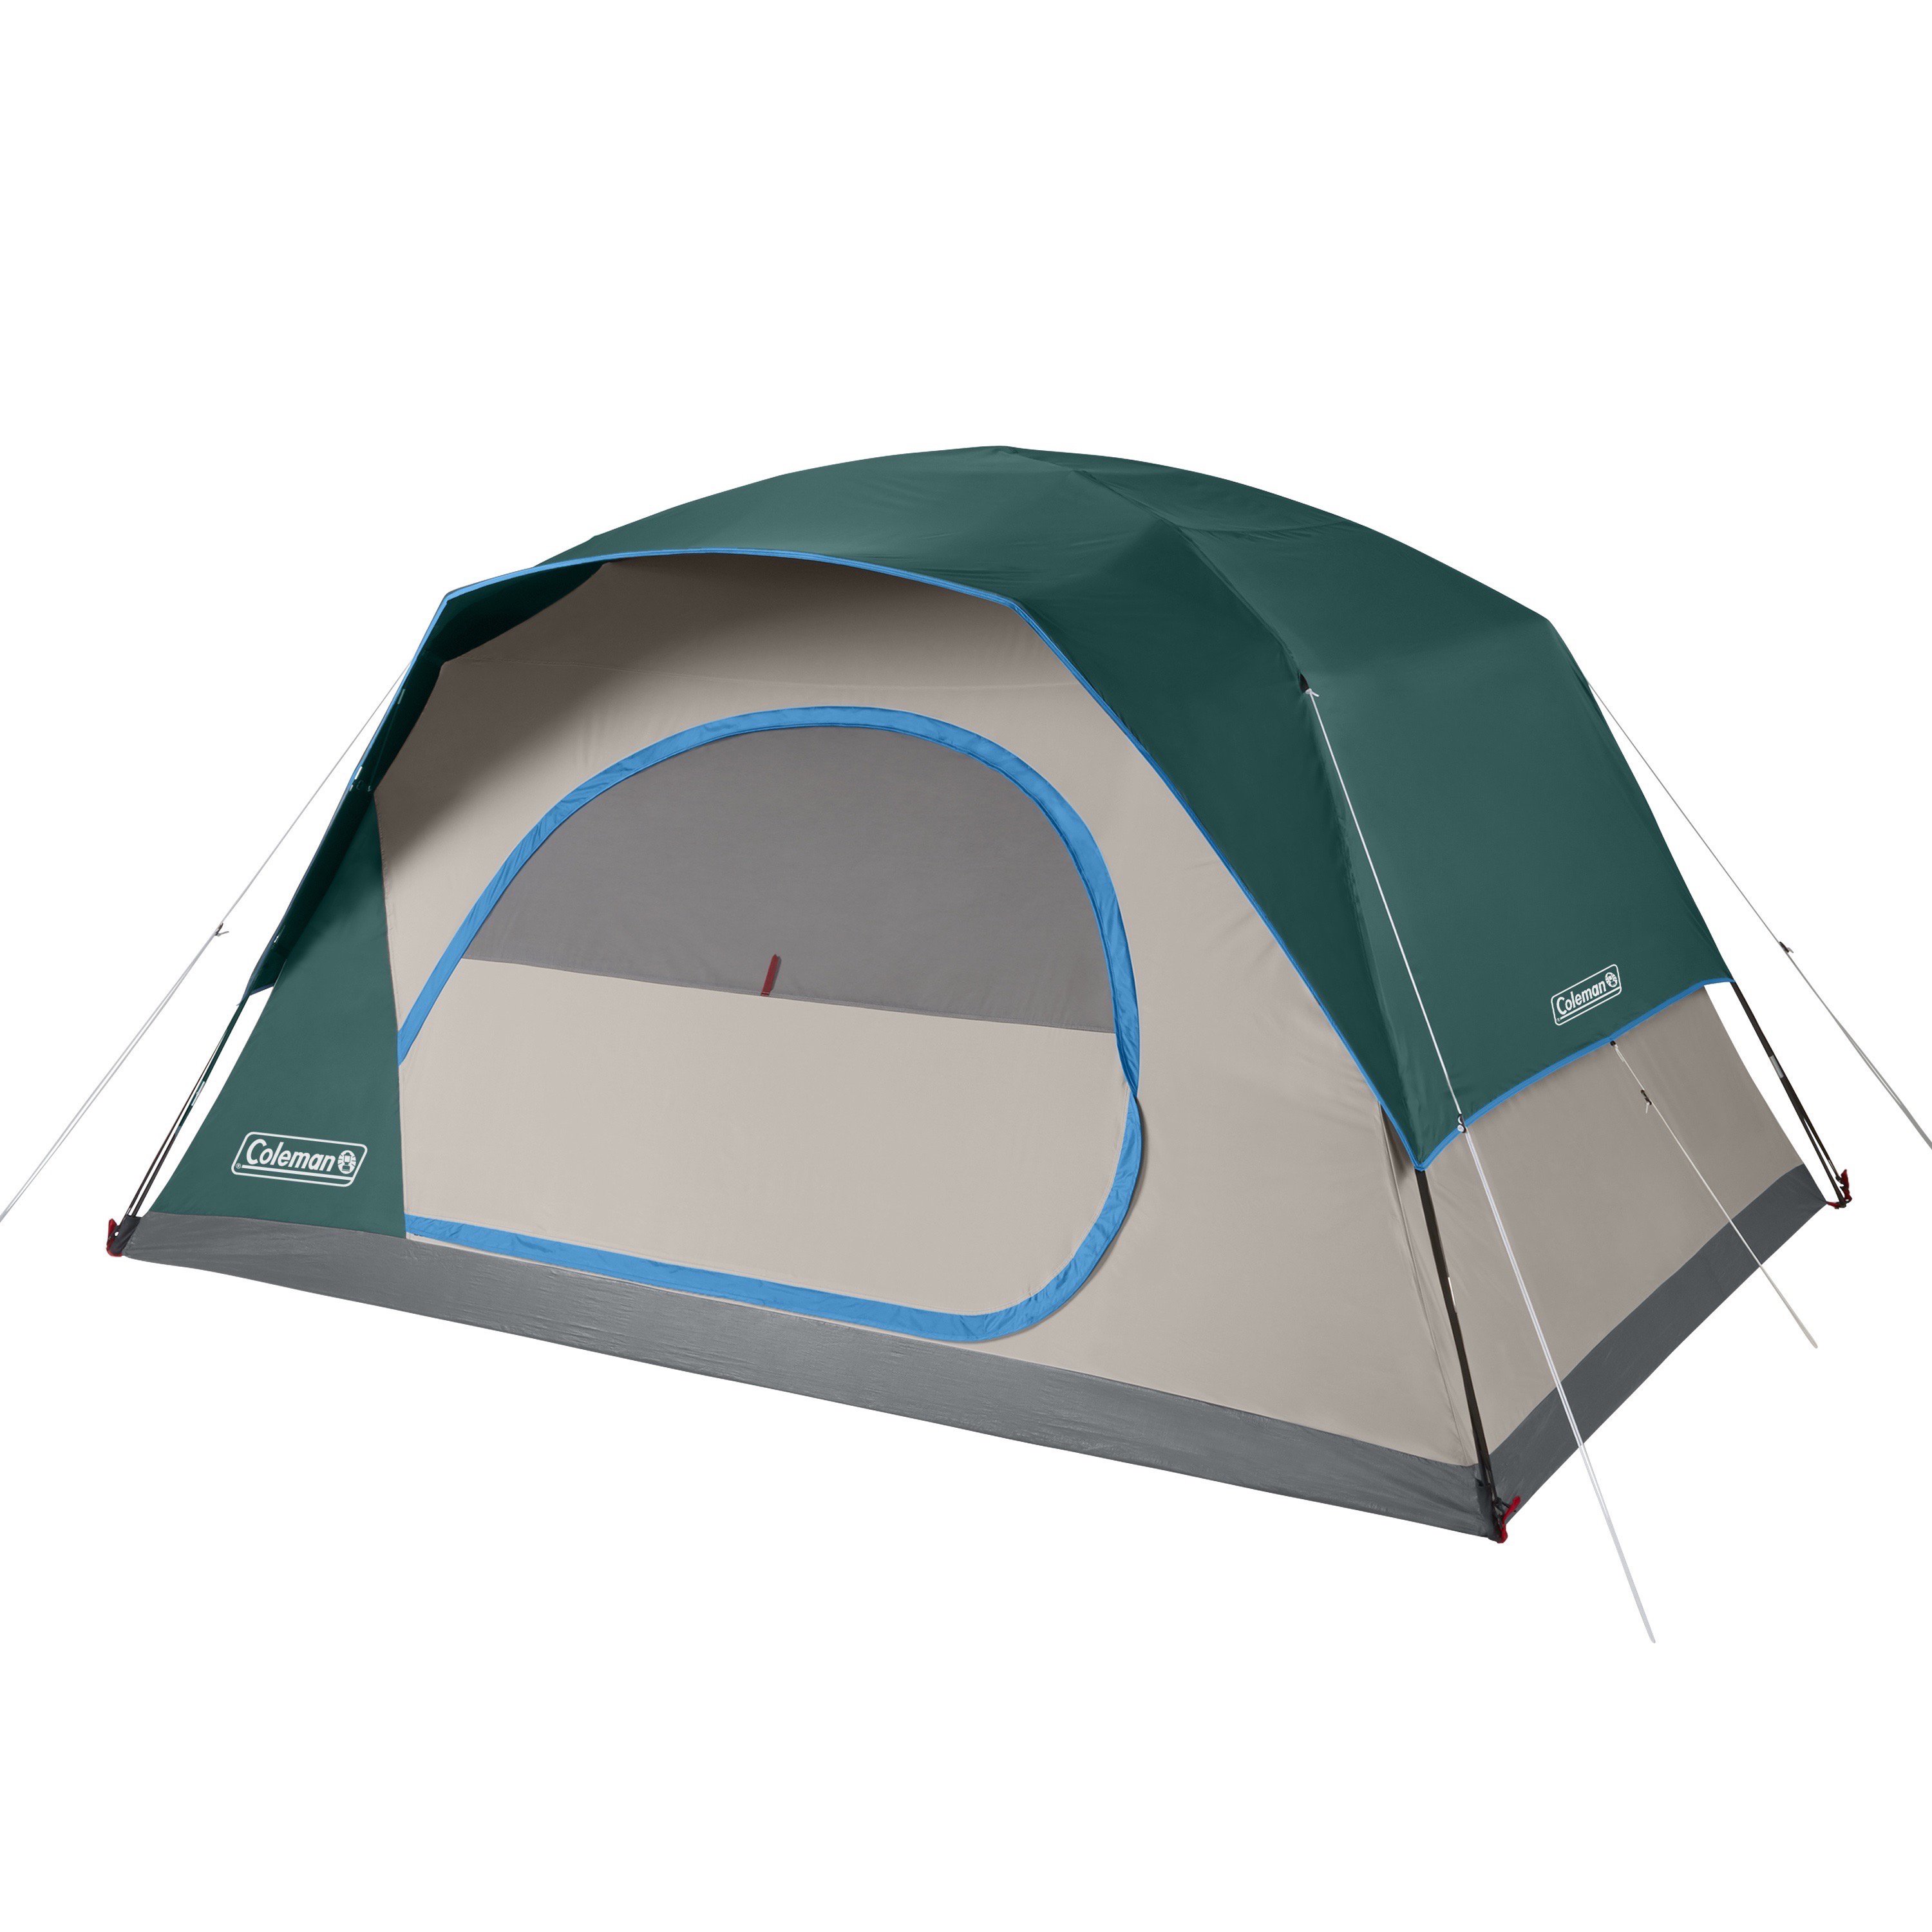 Review: Coleman 5-Person Instant Dome Tent